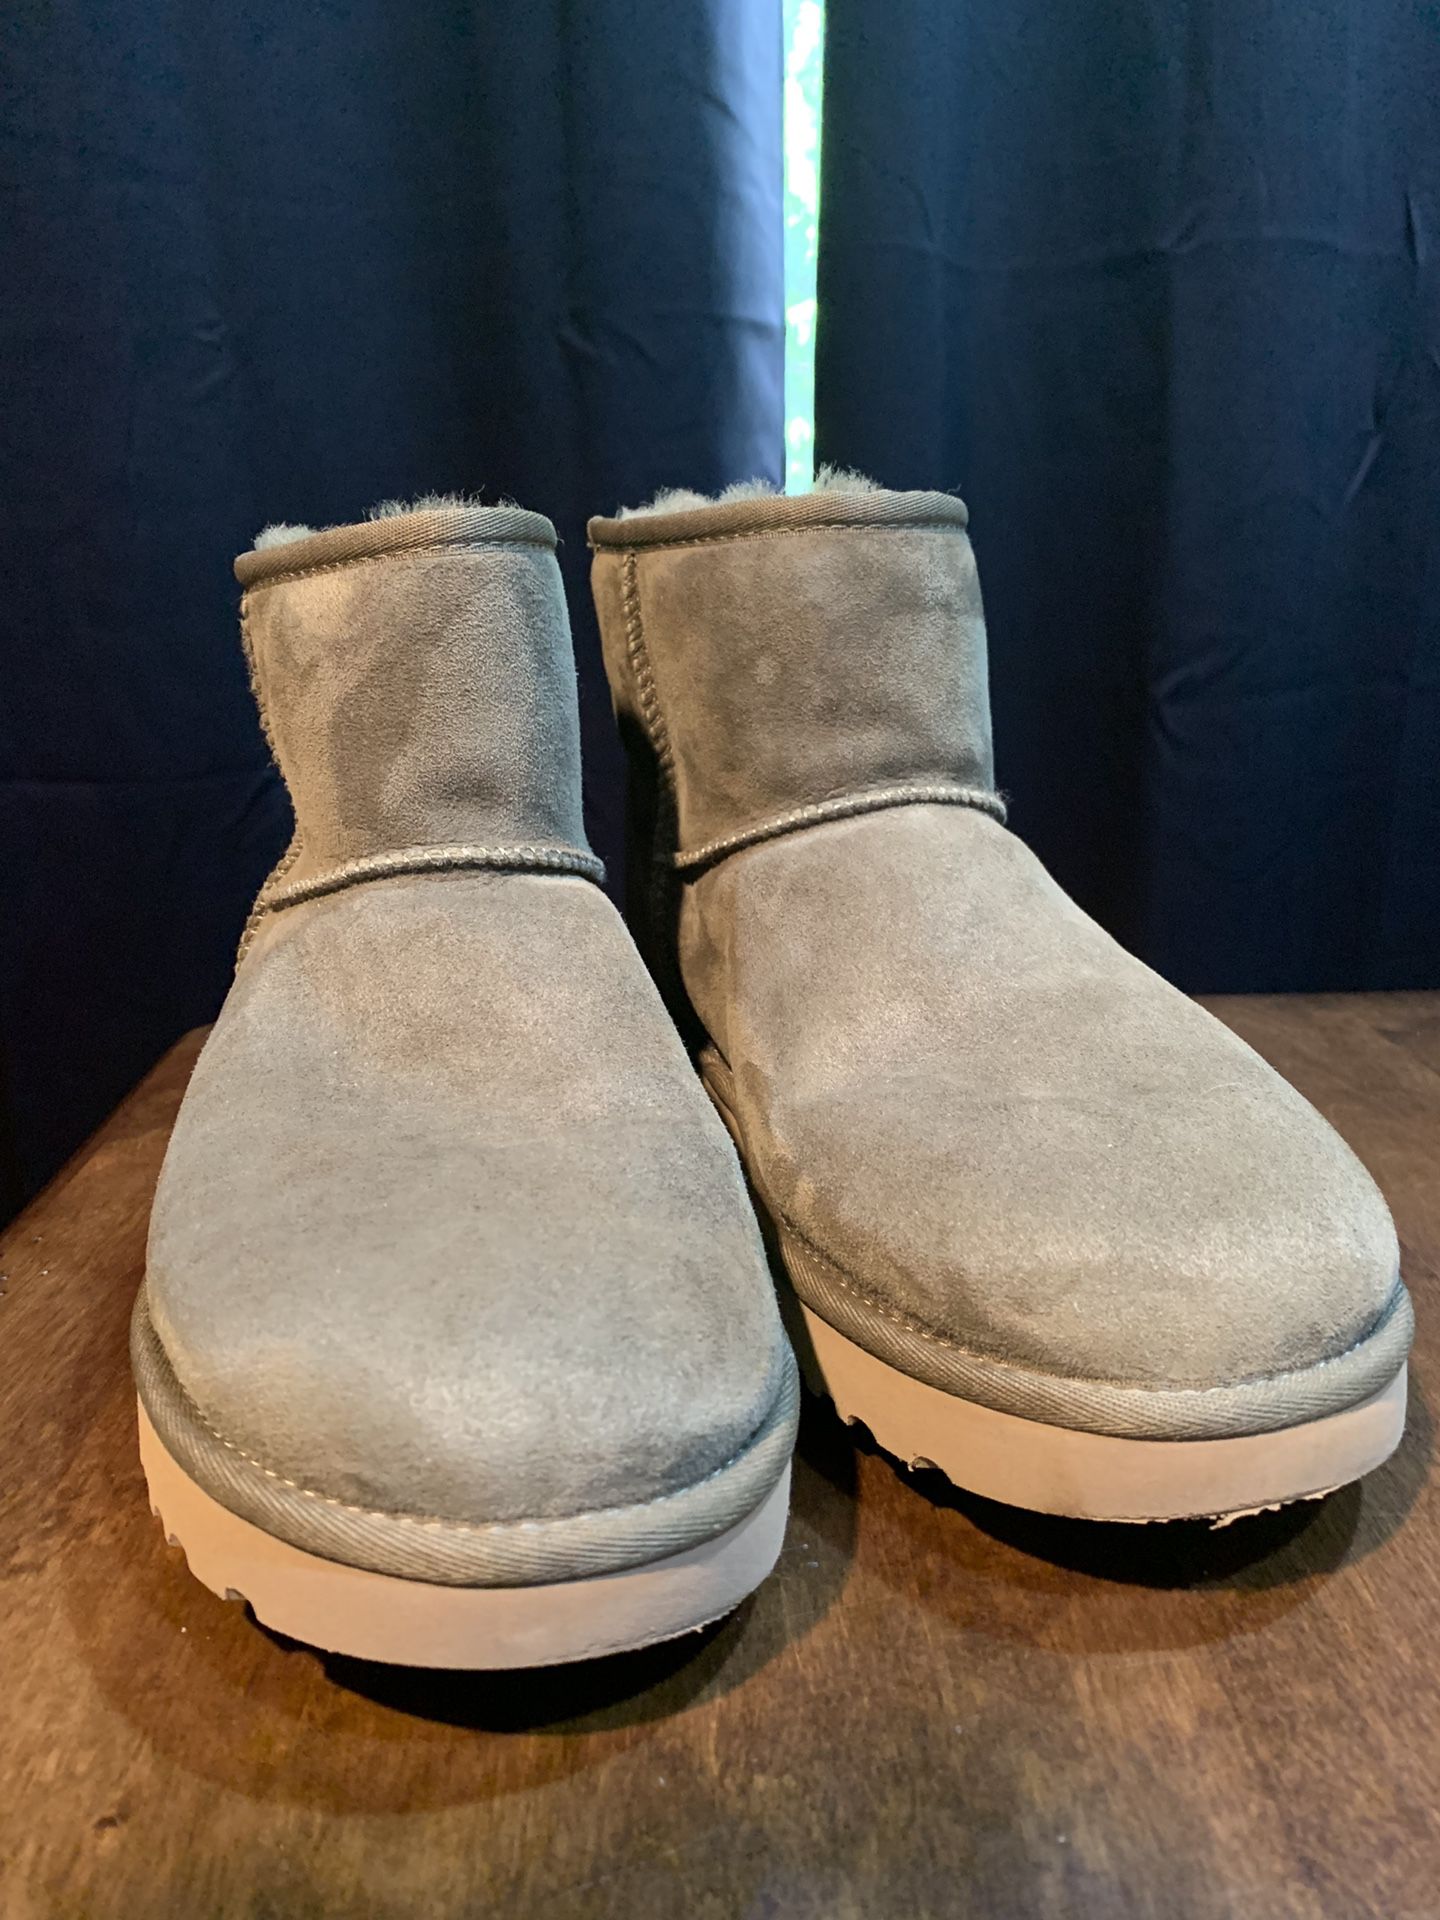 New women’s size 11 ugg boots. New never worn. Green